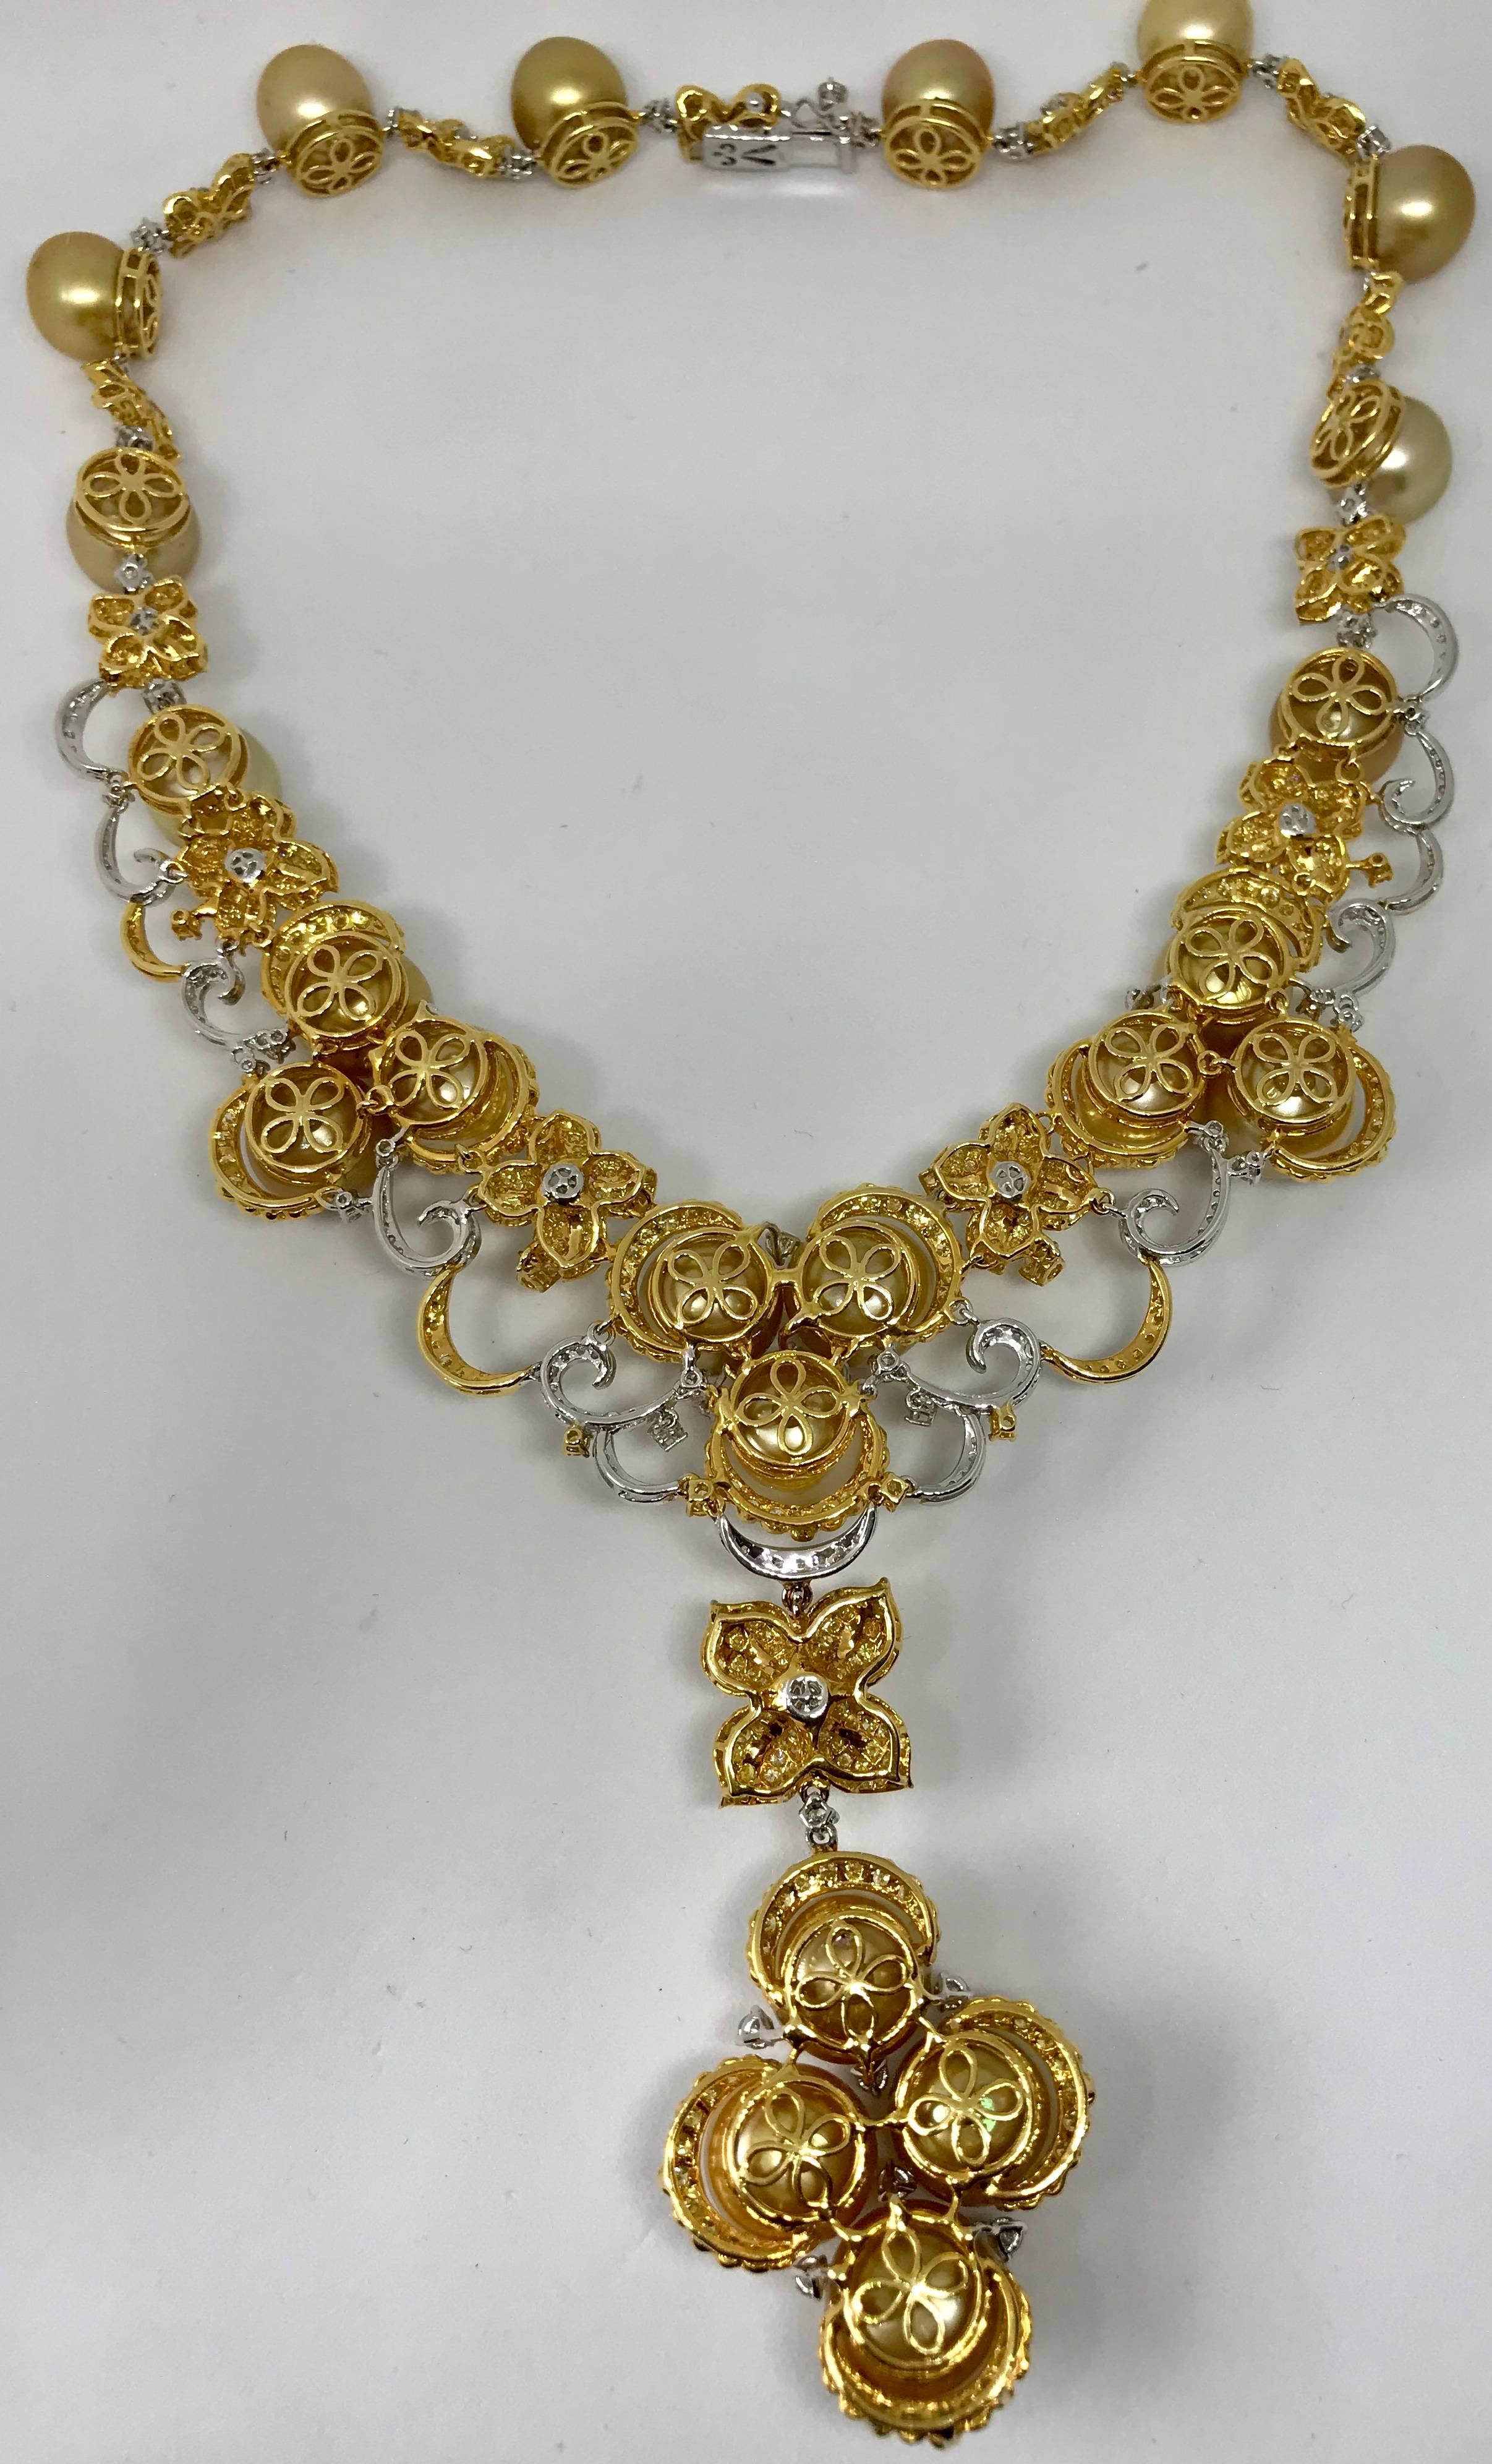 Golden South Sea Pearl Necklace with Diamonds and 18kt Gold 64.26 grams im Zustand „Neu“ im Angebot in New York, NY